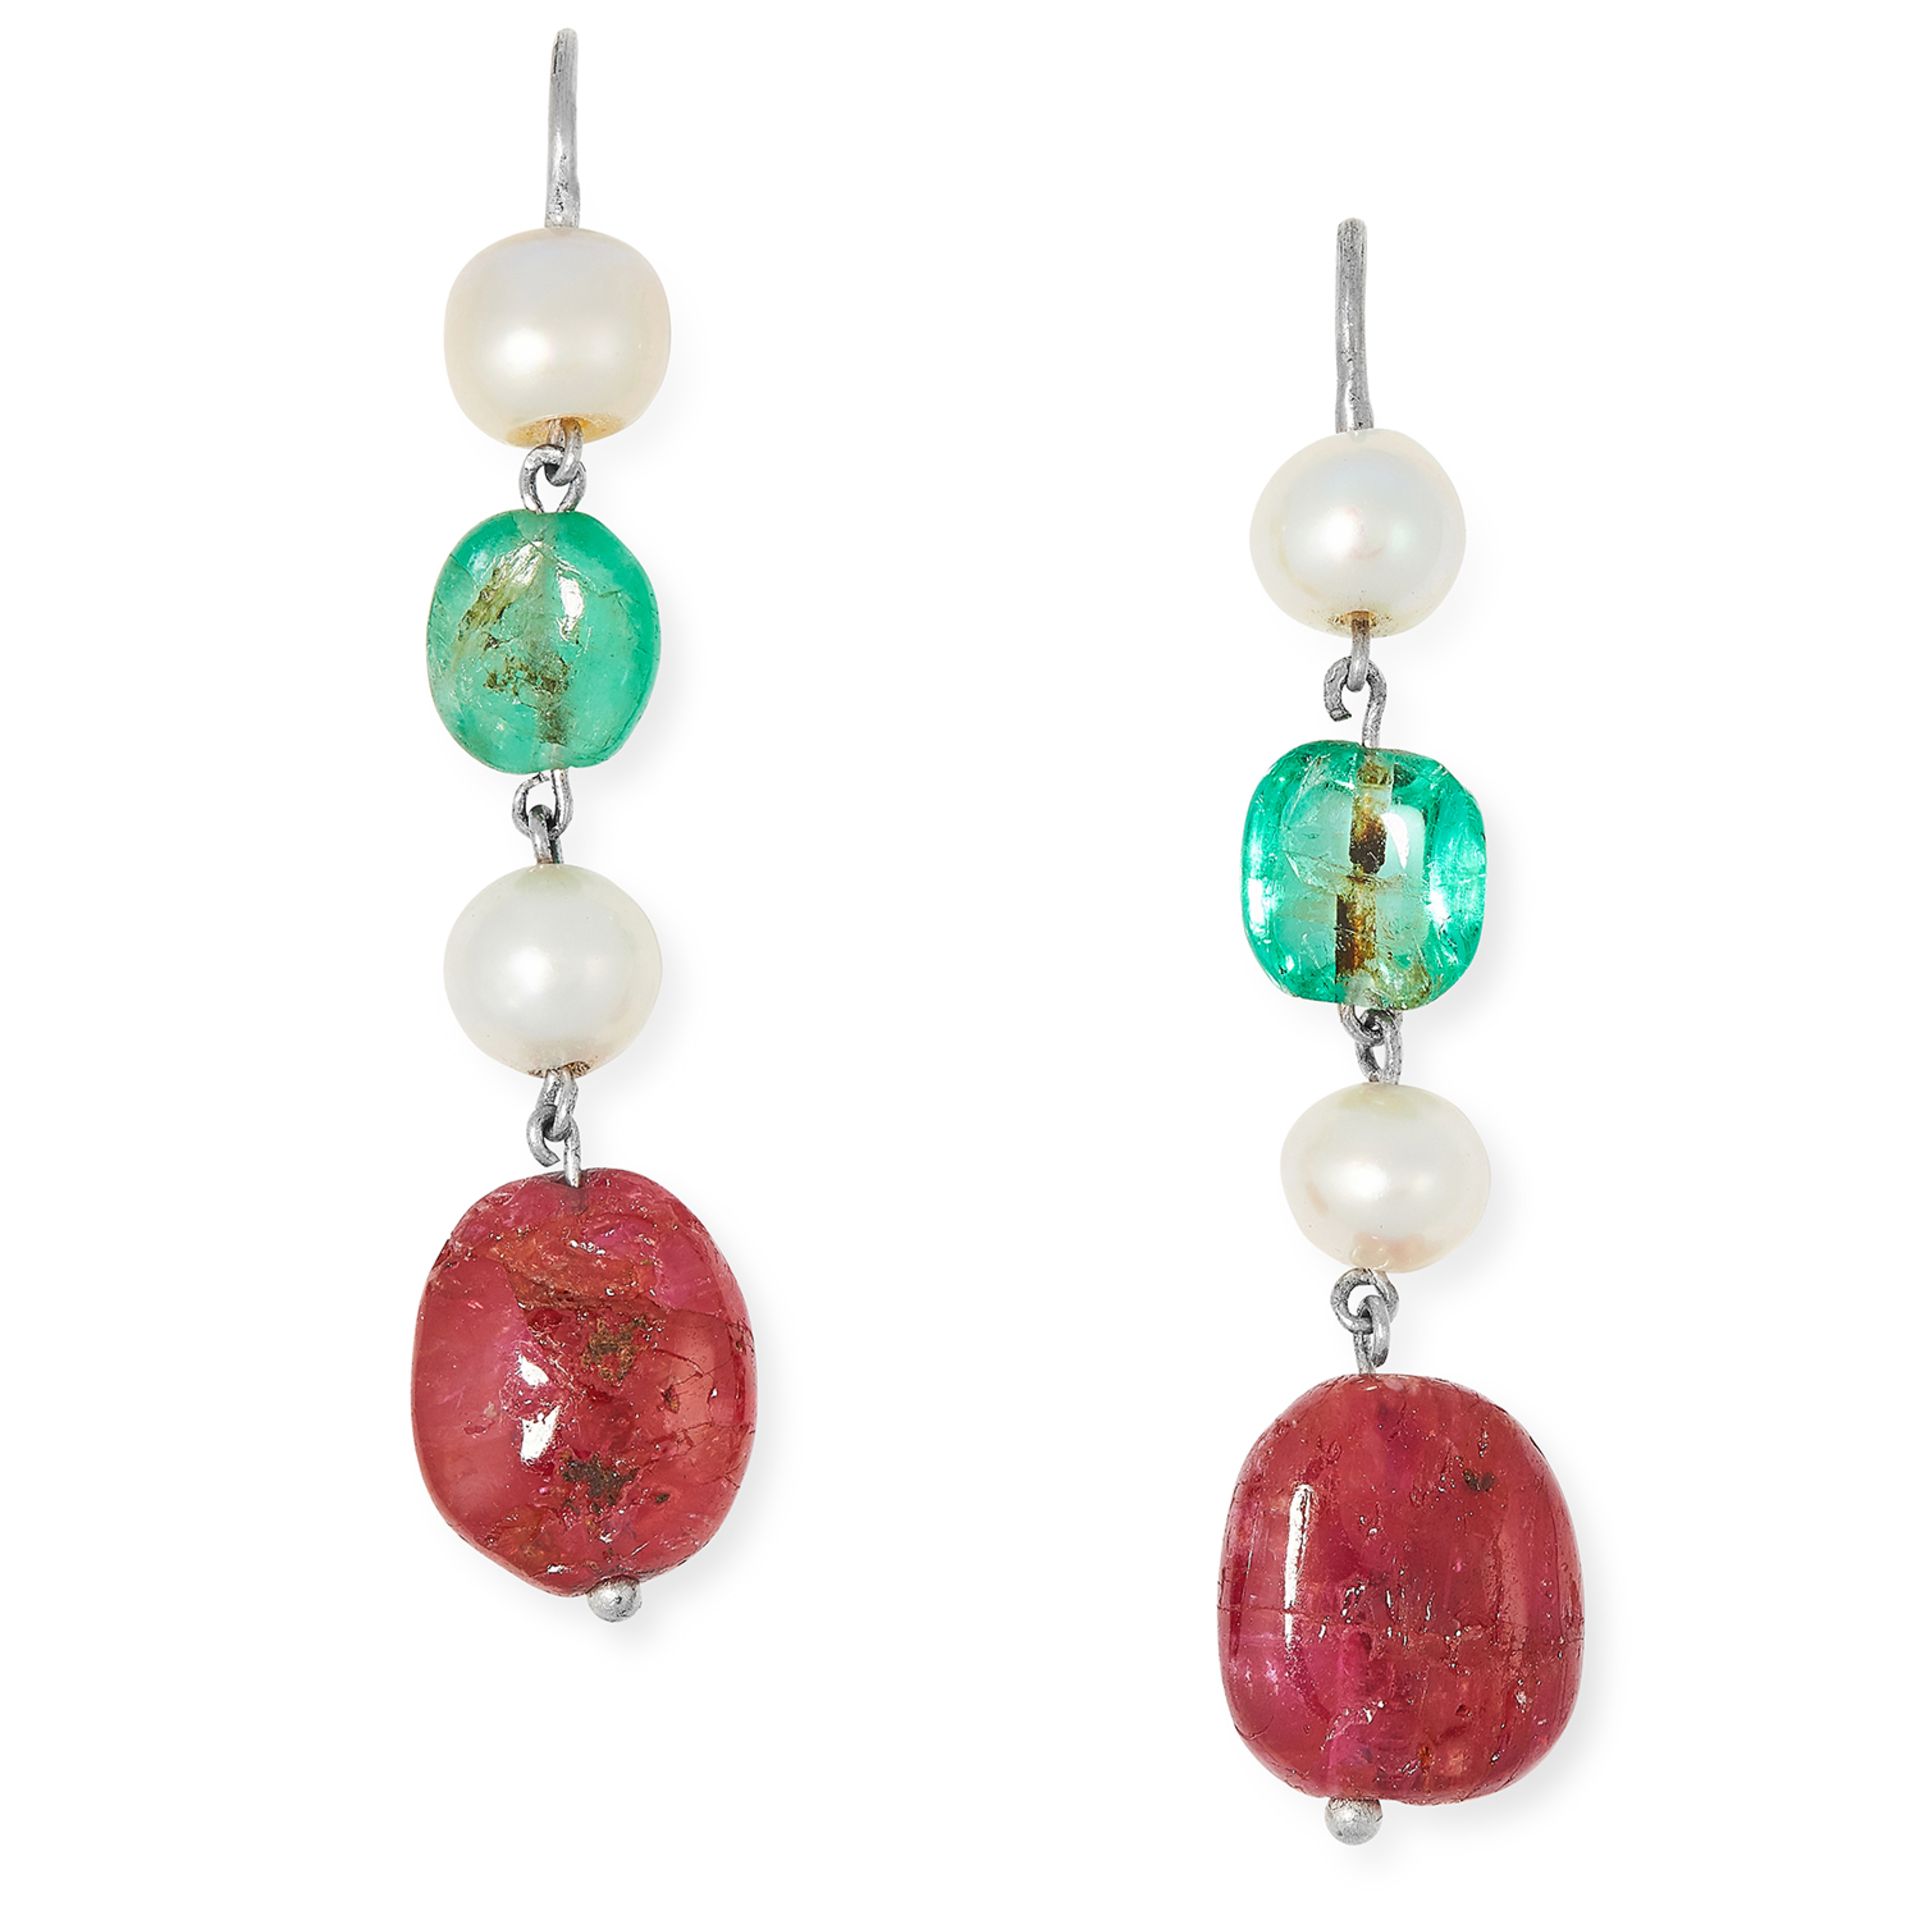 NATURAL PEARL, EMERALD AND RUBY DROP EARRINGS each set with two pearls and a polished emerald and